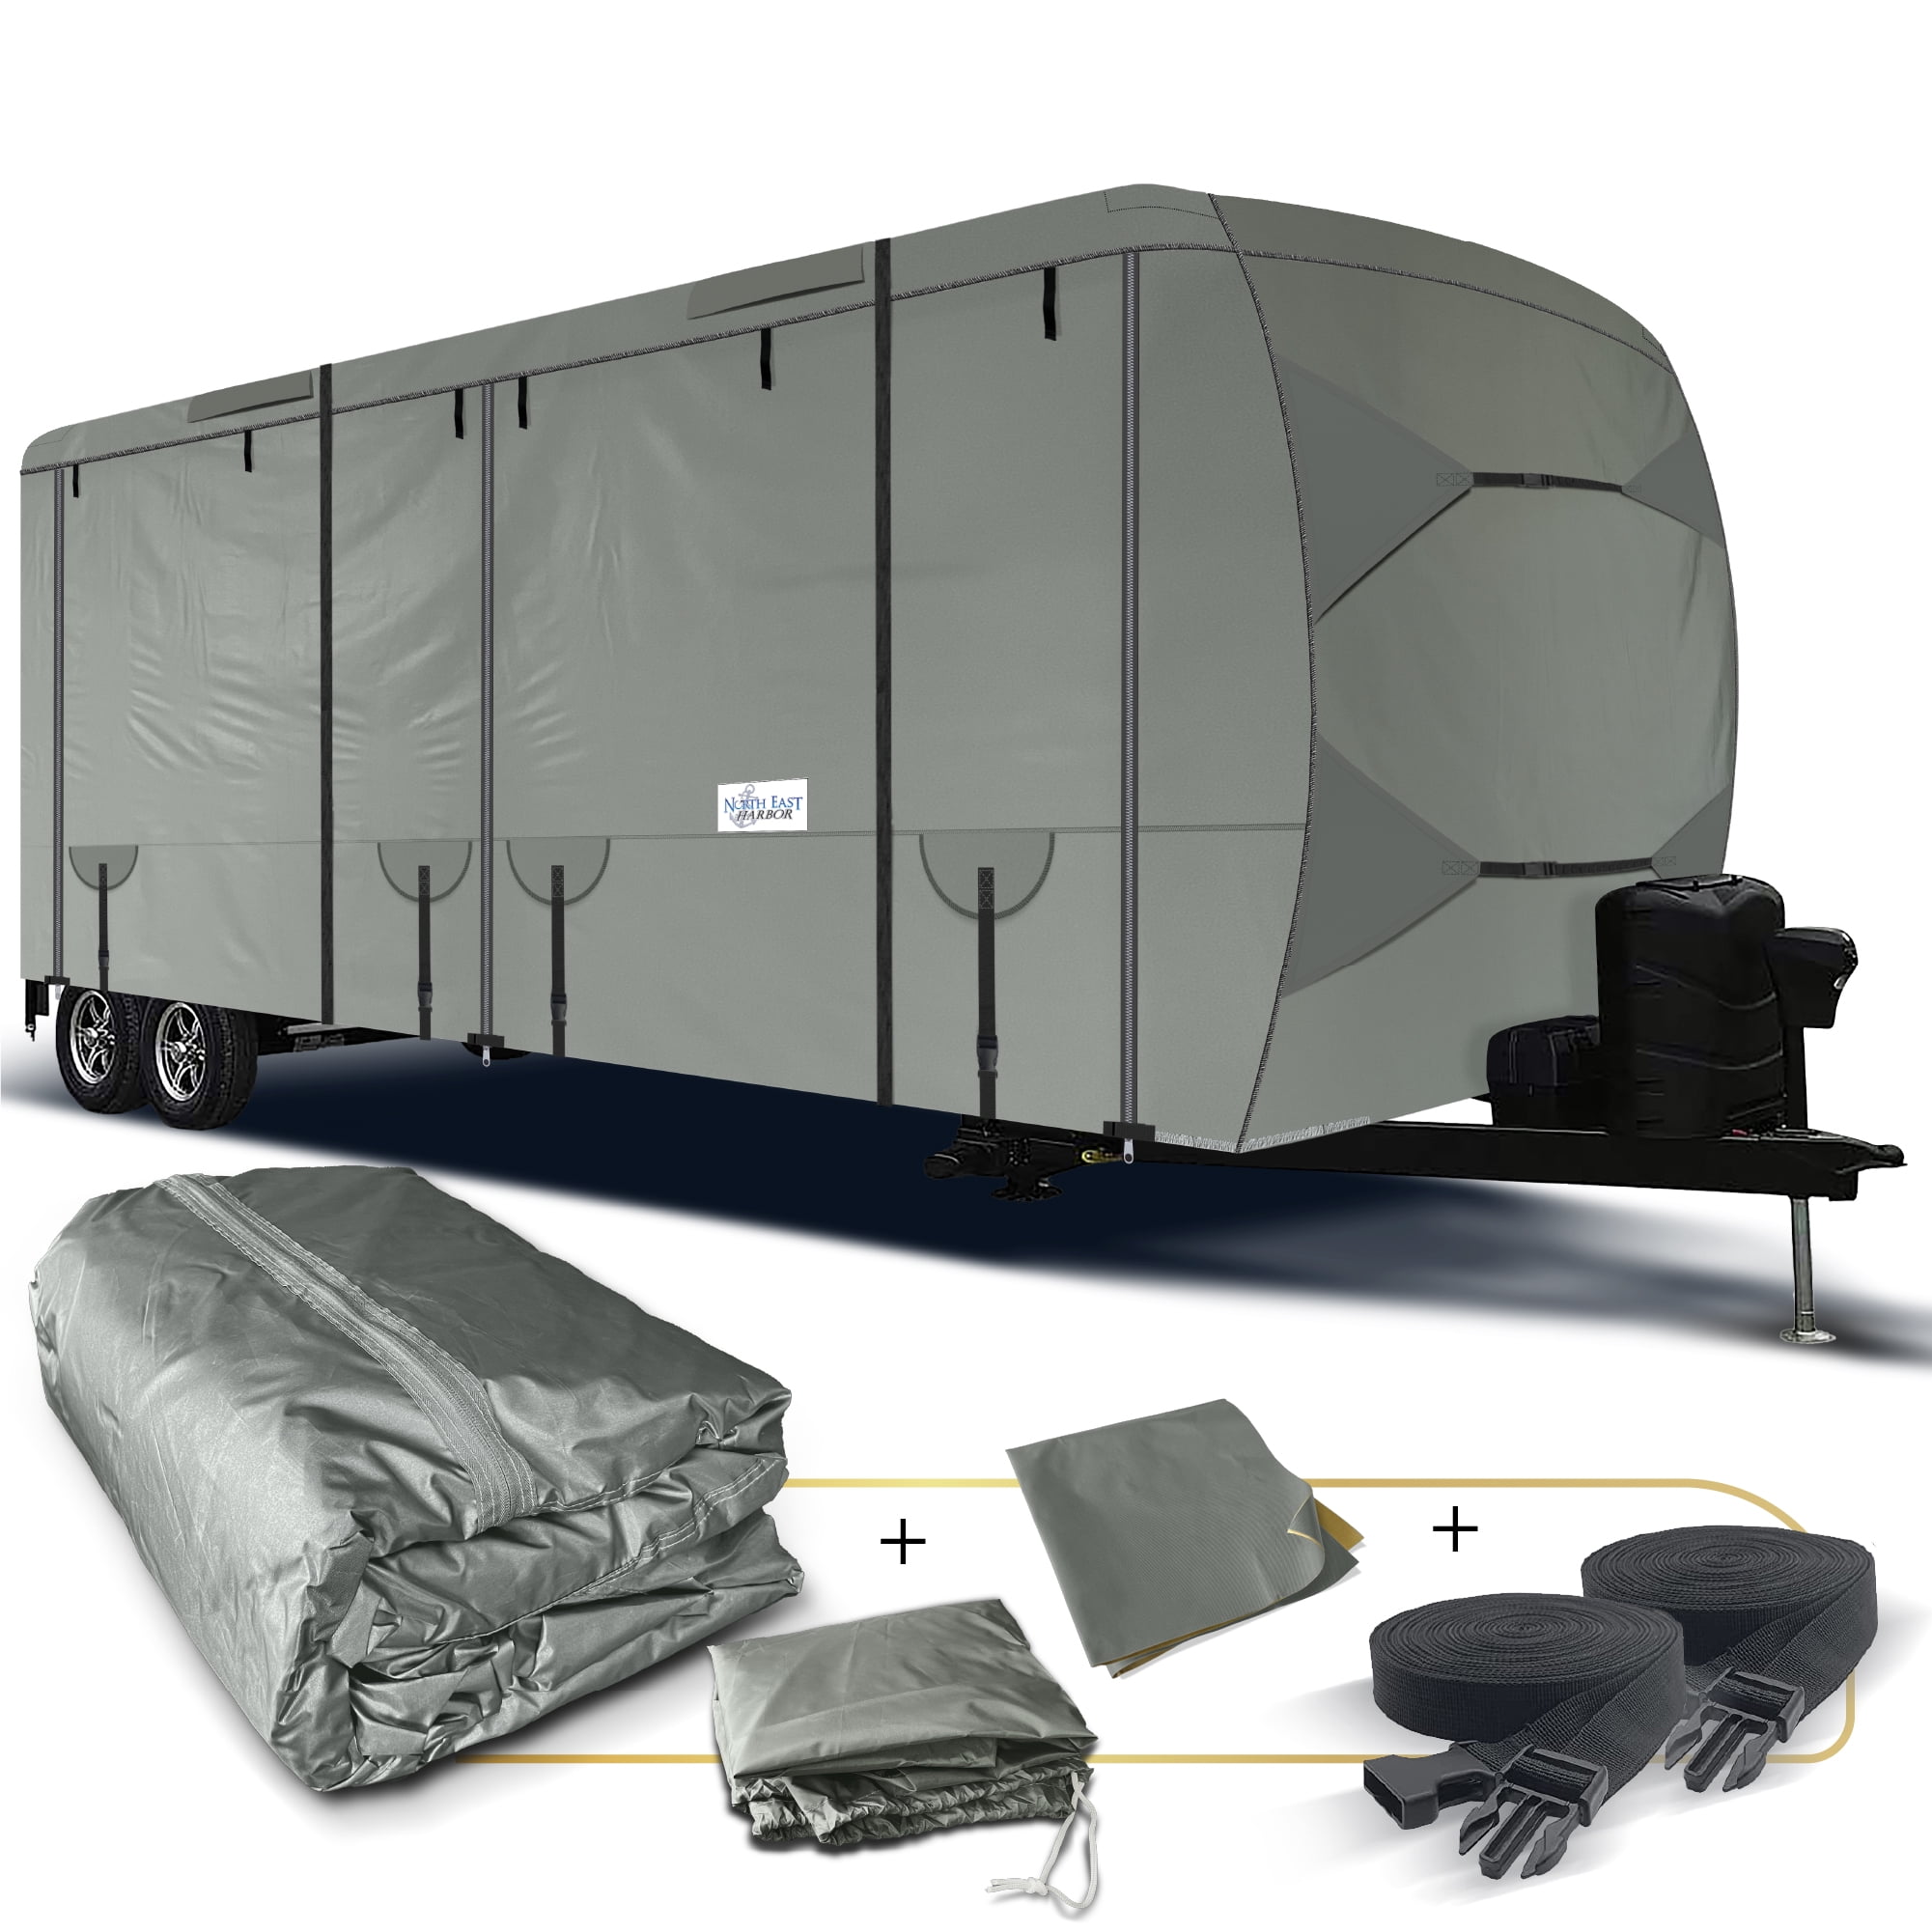 Fonzier Upgraded Waterproof Travel Trailer RV Cover Windproof Camper Cover Breathable for 20'1-22' with 4 Gutter Spout Covers Tongue Jack Cover Extra 2 Windproof Straps 